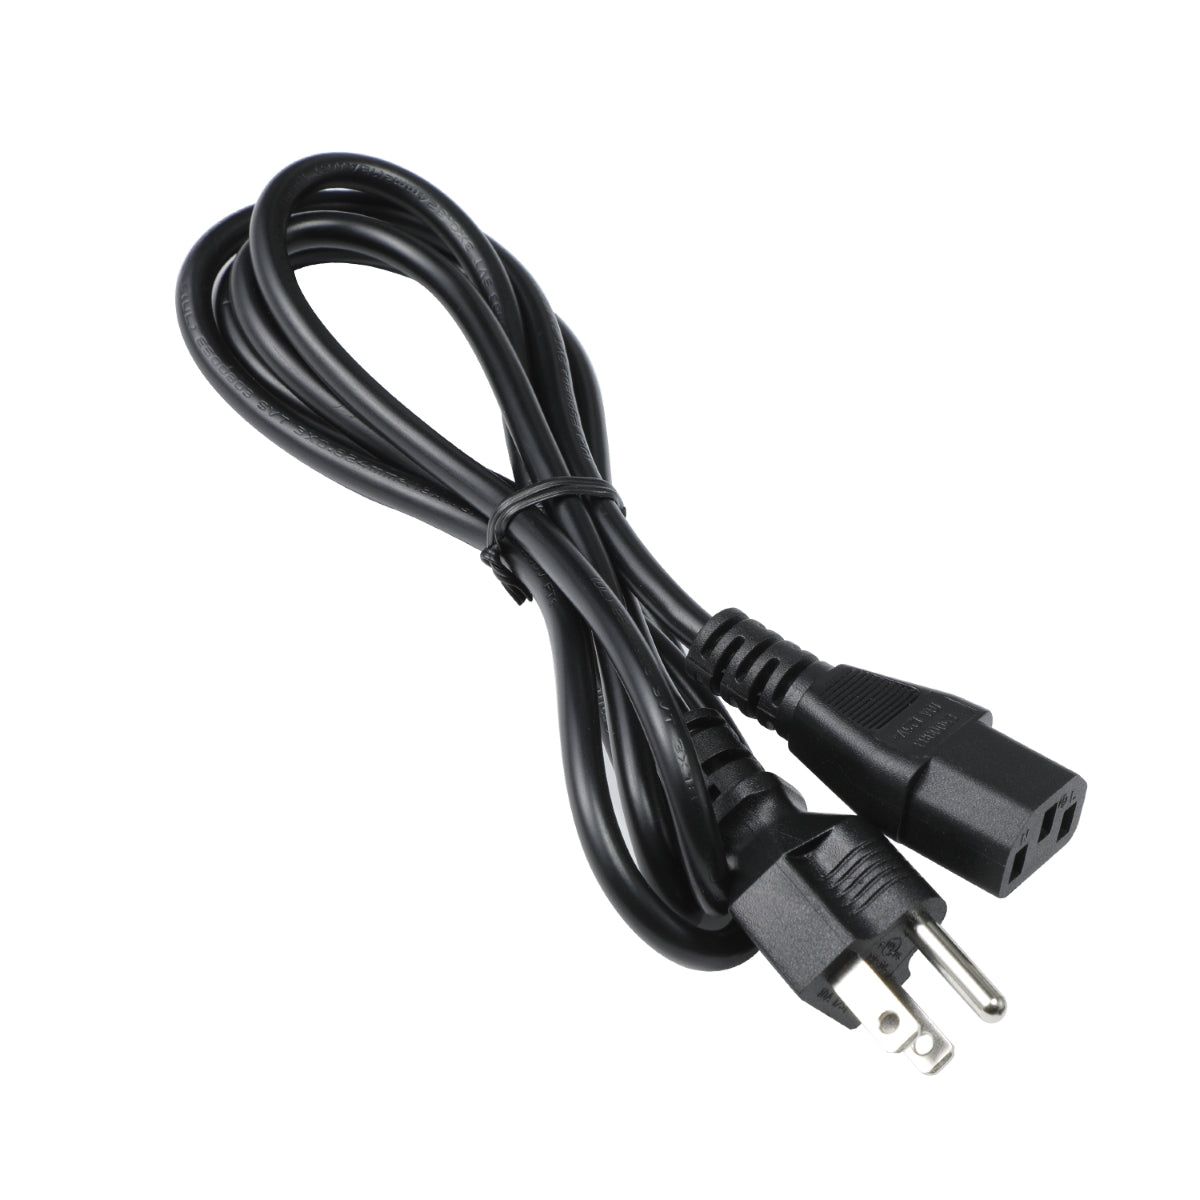 Power Cord for BenQ BL2780 IPS Monitor